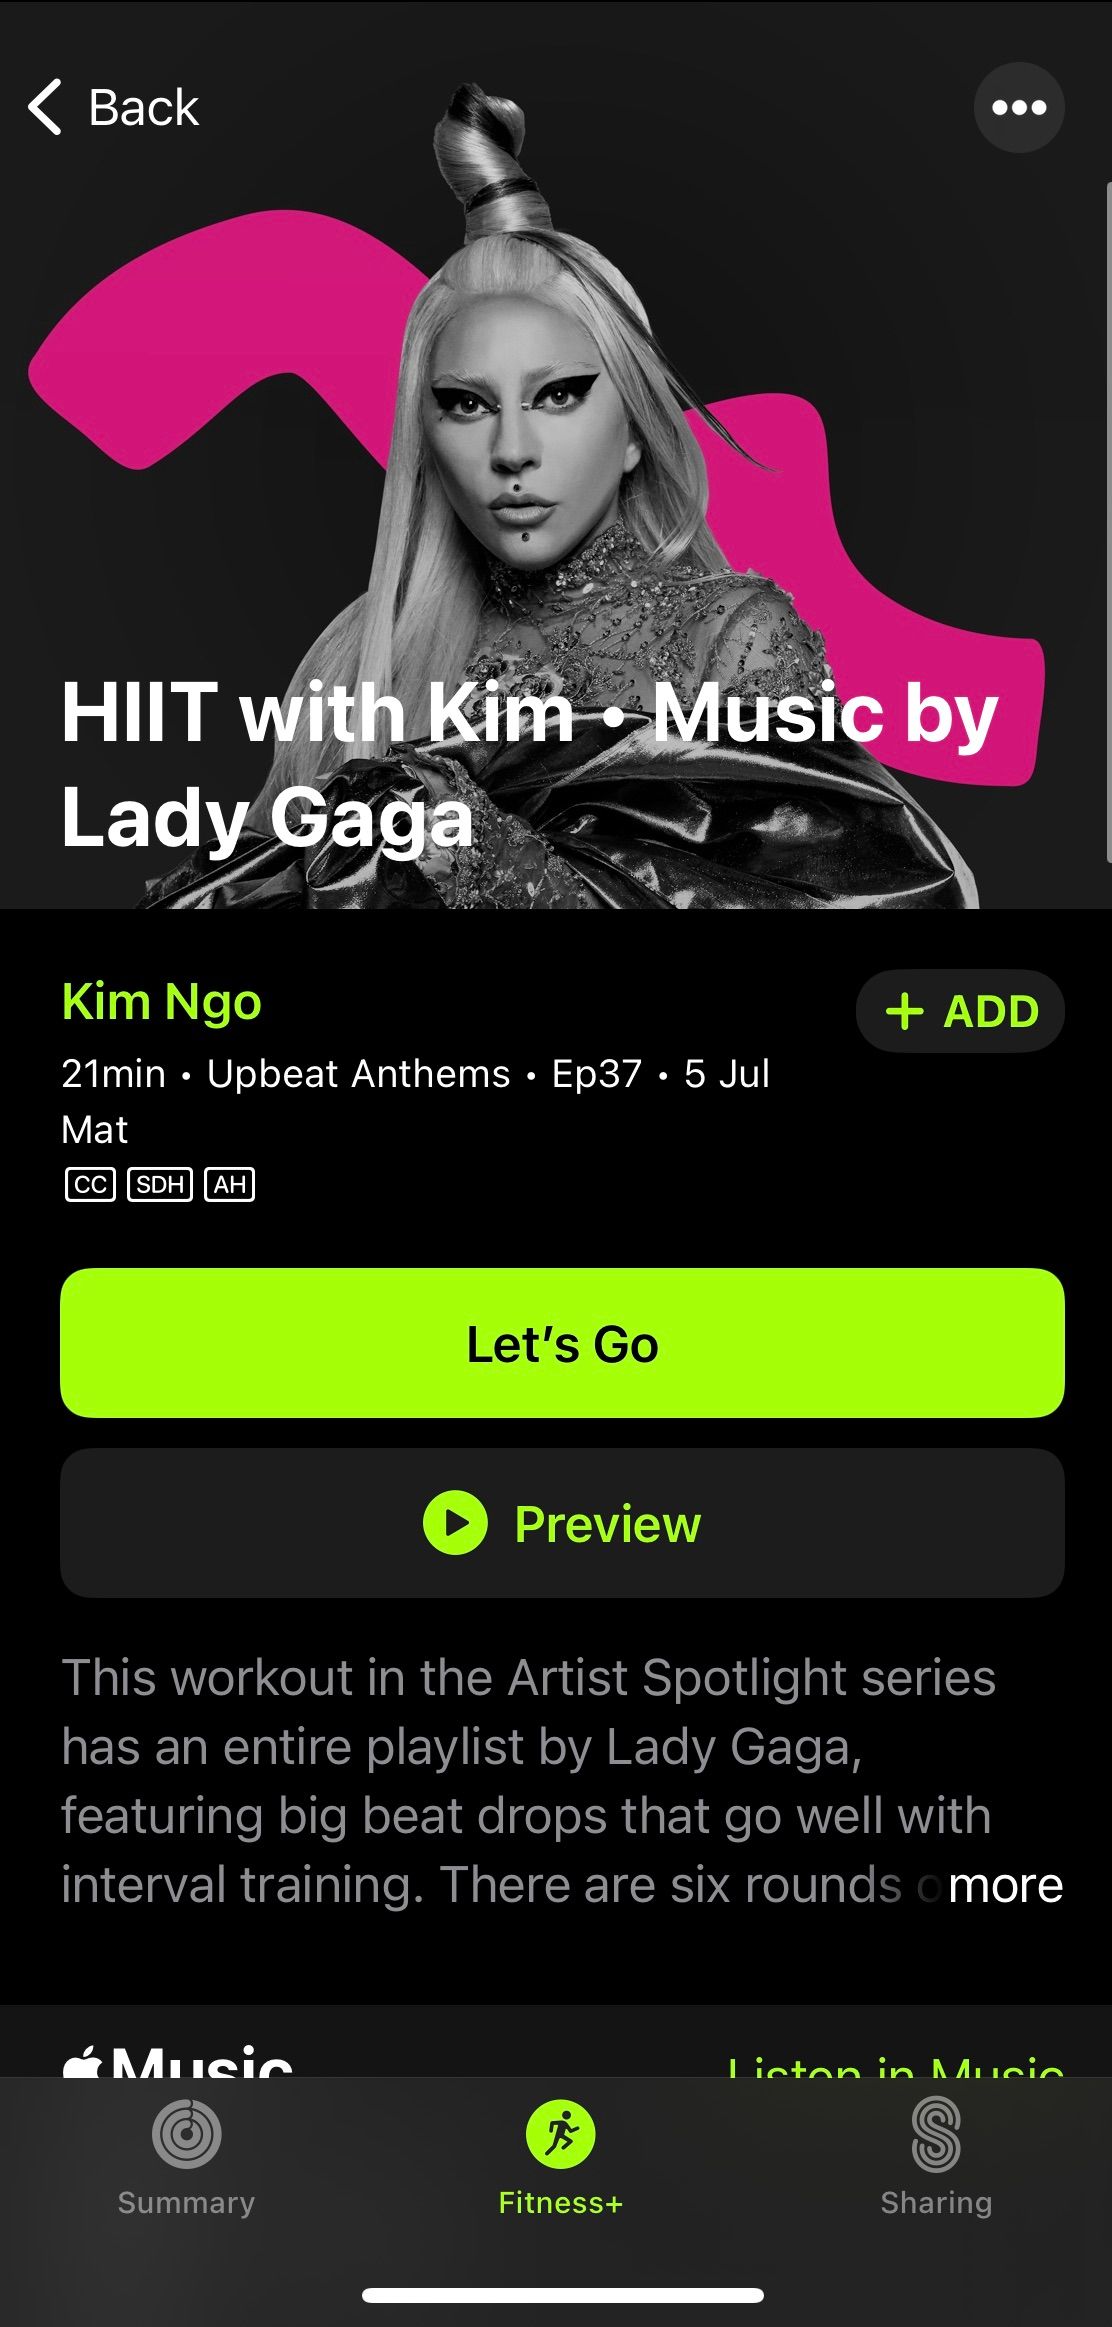 Screenshot from Apple Fitness+ app showing a HIIT workout with Lady Gaga